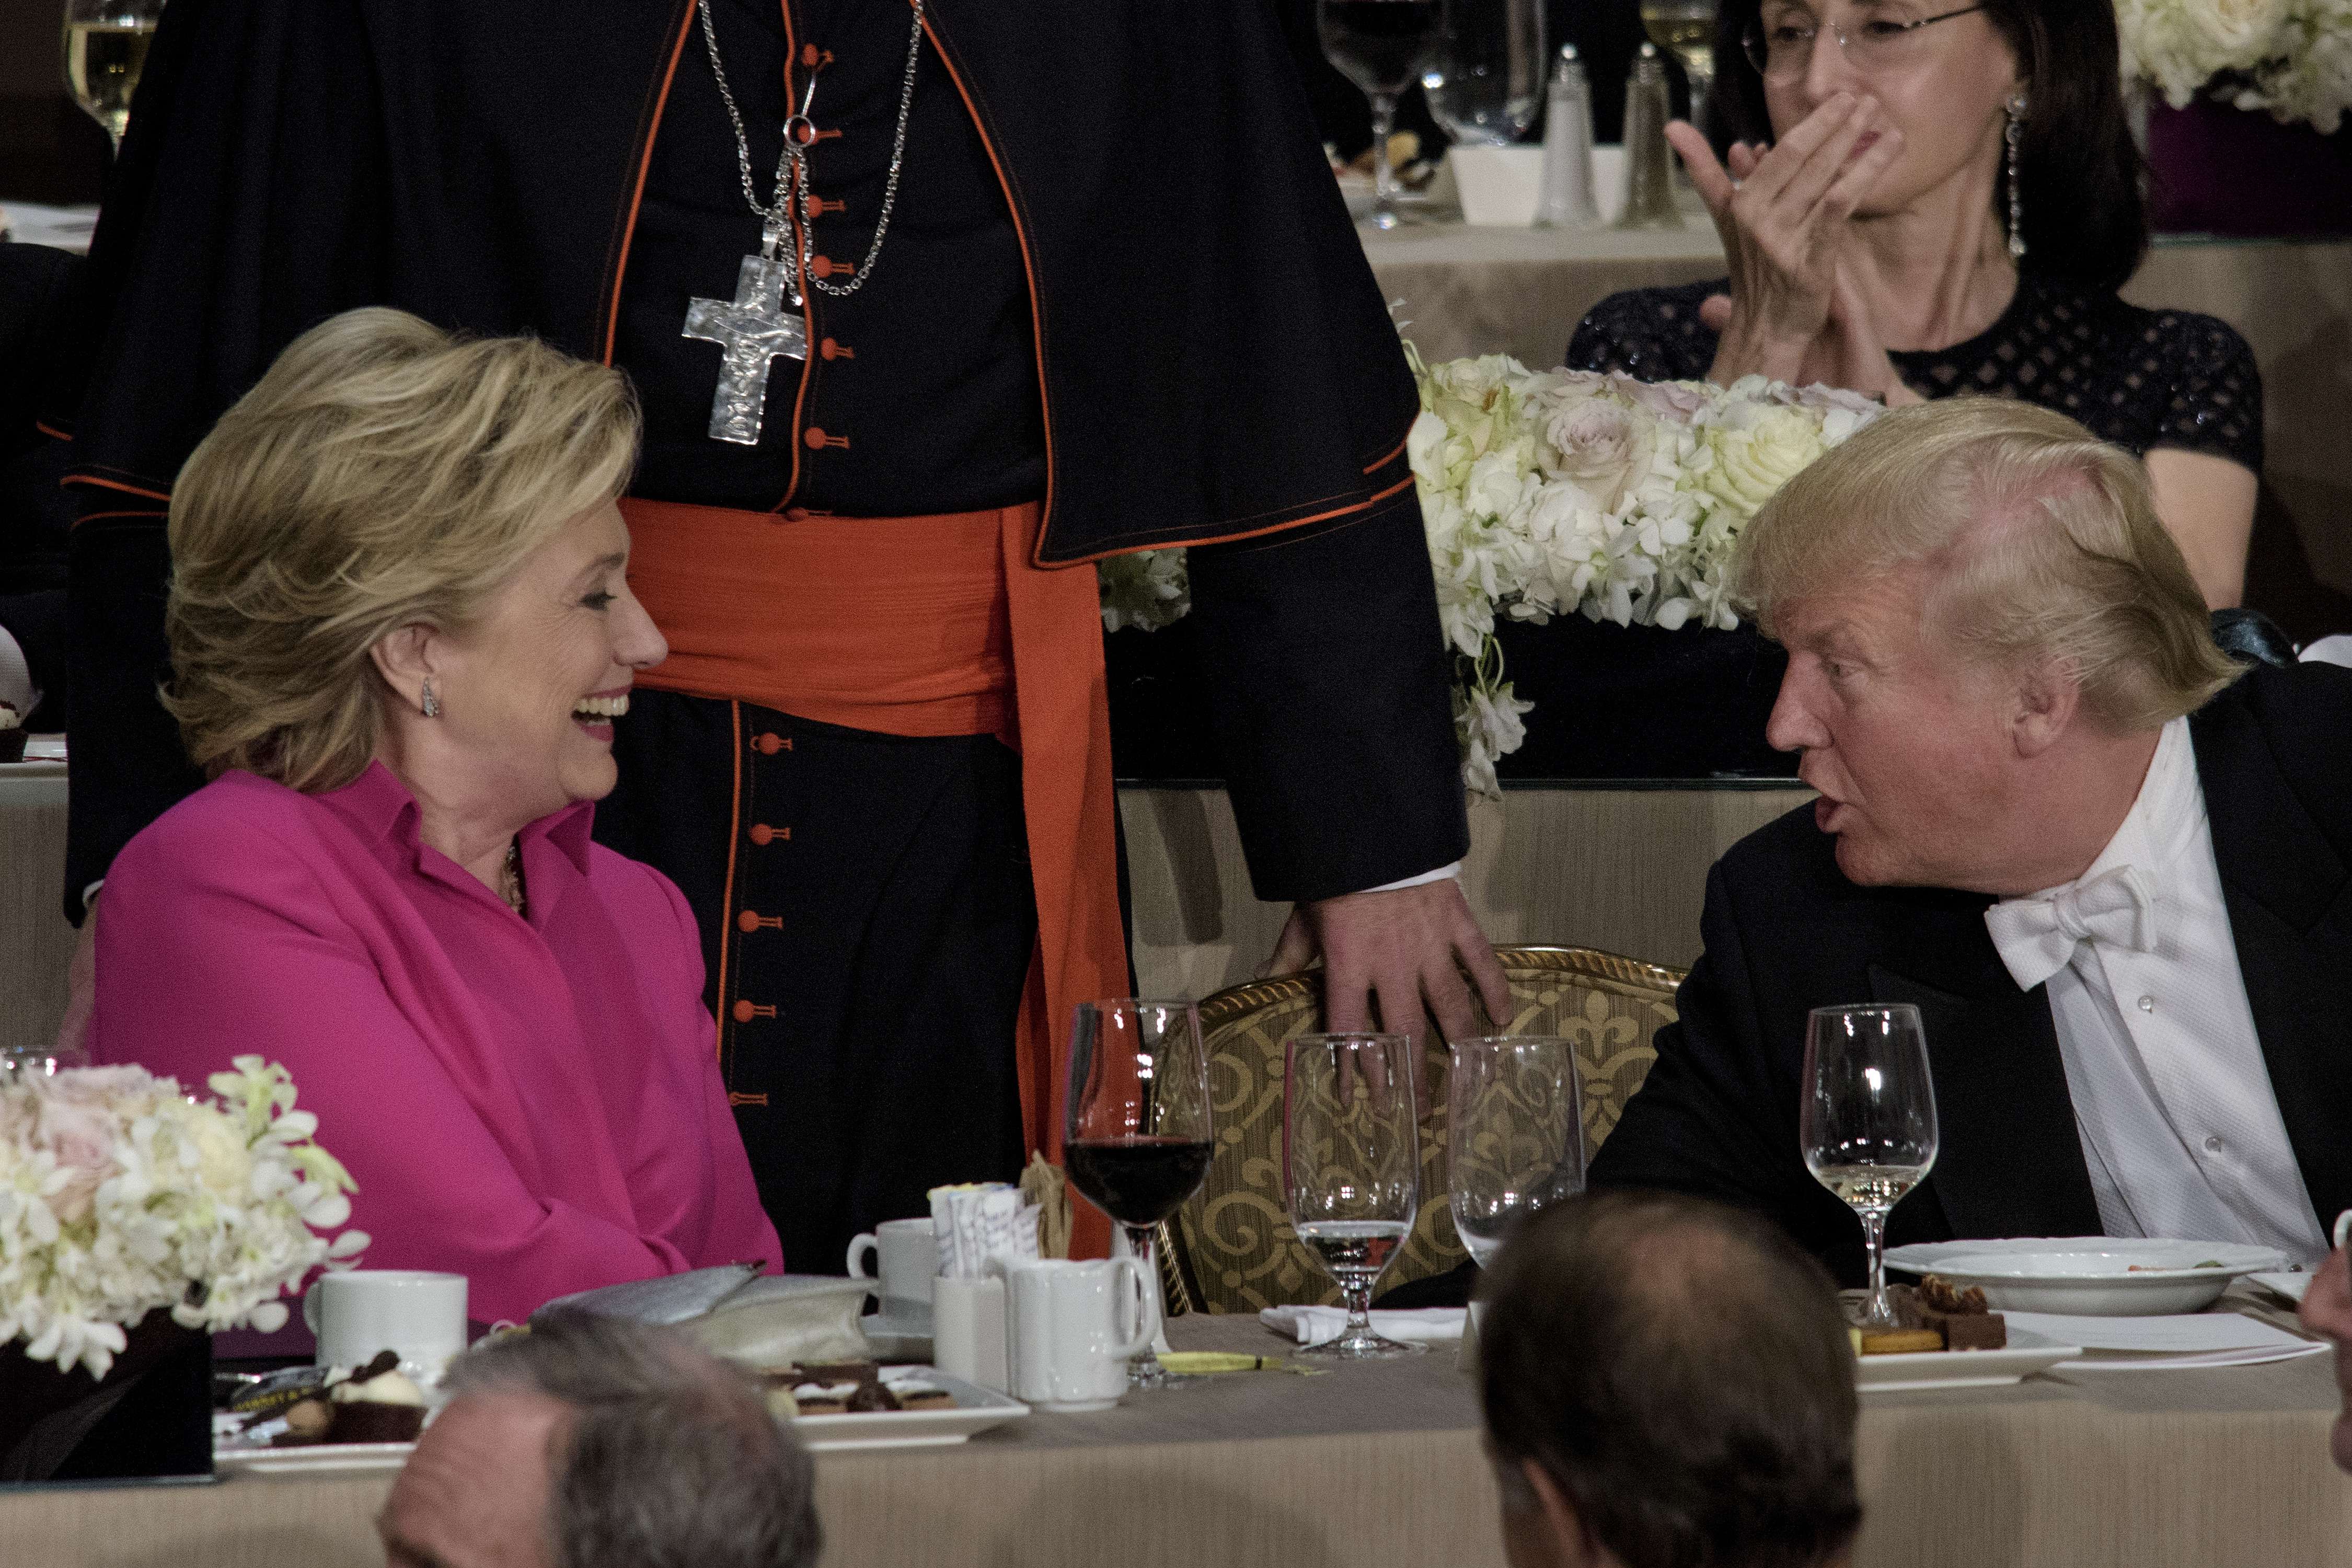 Democratic presidential nominee Hillary Clinton and Republican presidential nominee Donald Trump attend the Alfred E. Smith Memorial Foundation Dinner at New York’s Waldorf Astoria. Photo: AFP